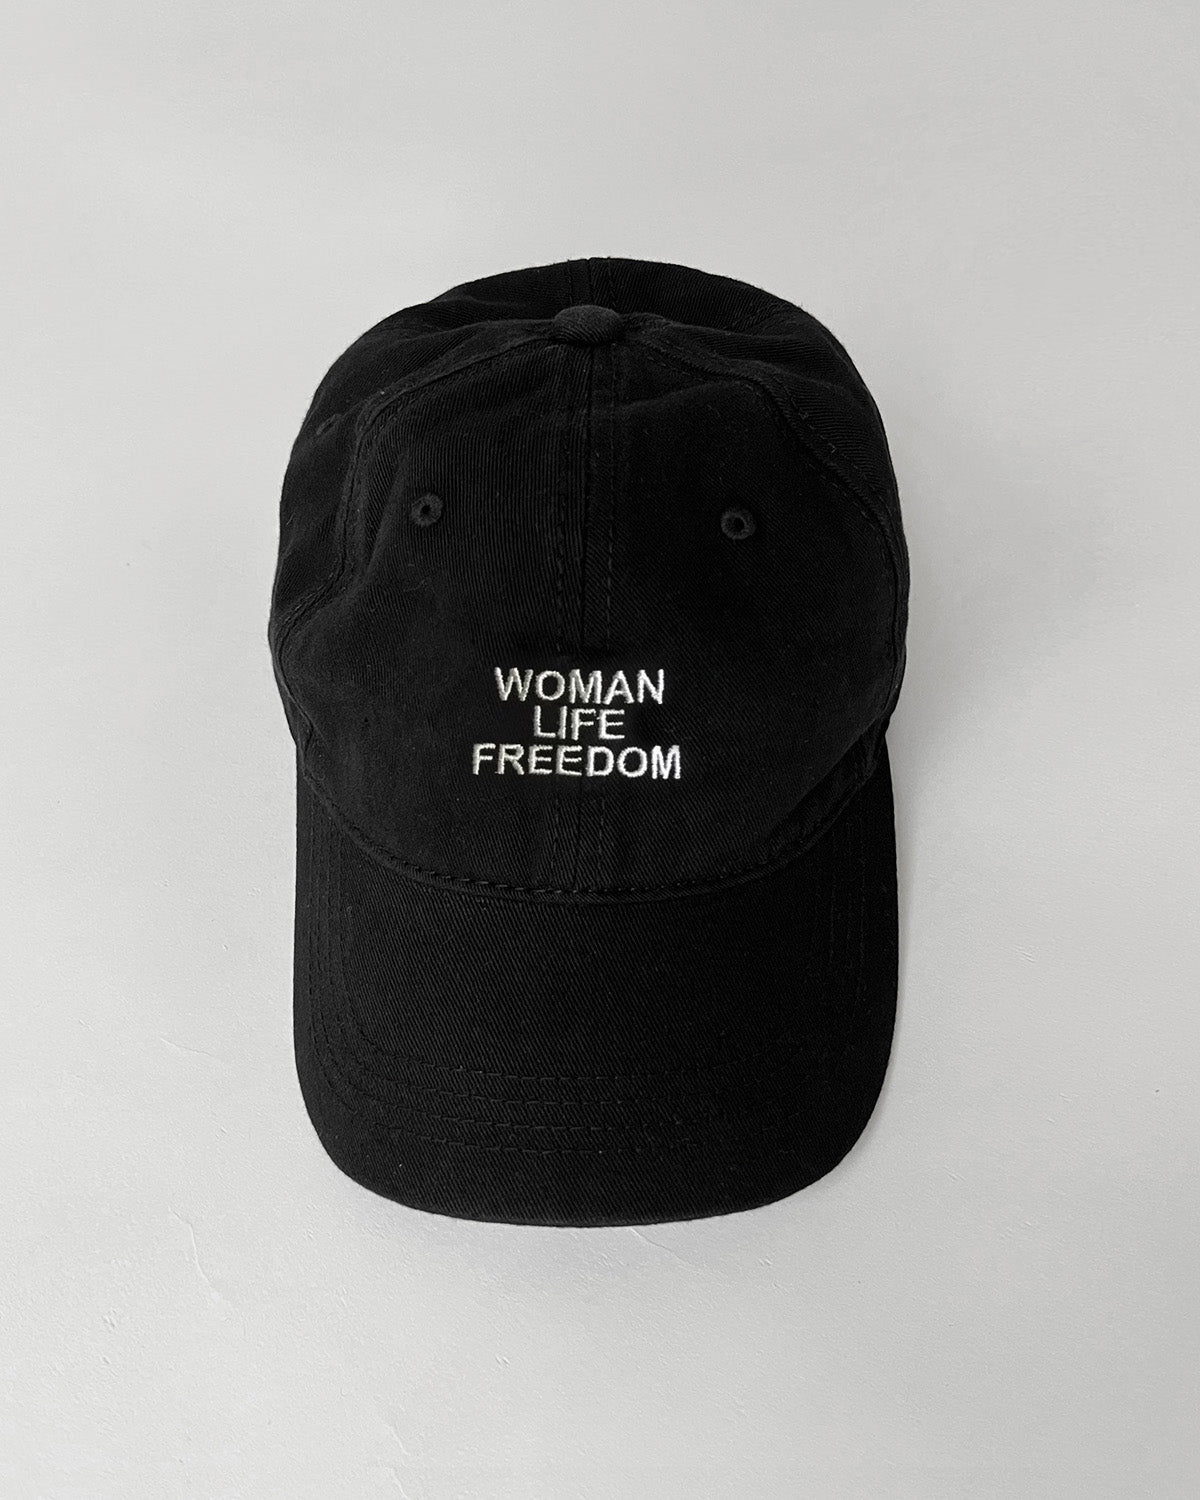 CAP | WOMAN LIFE FREEDOM | SOLD OUT - SHIPPING DECEMBER 15 - lescarf